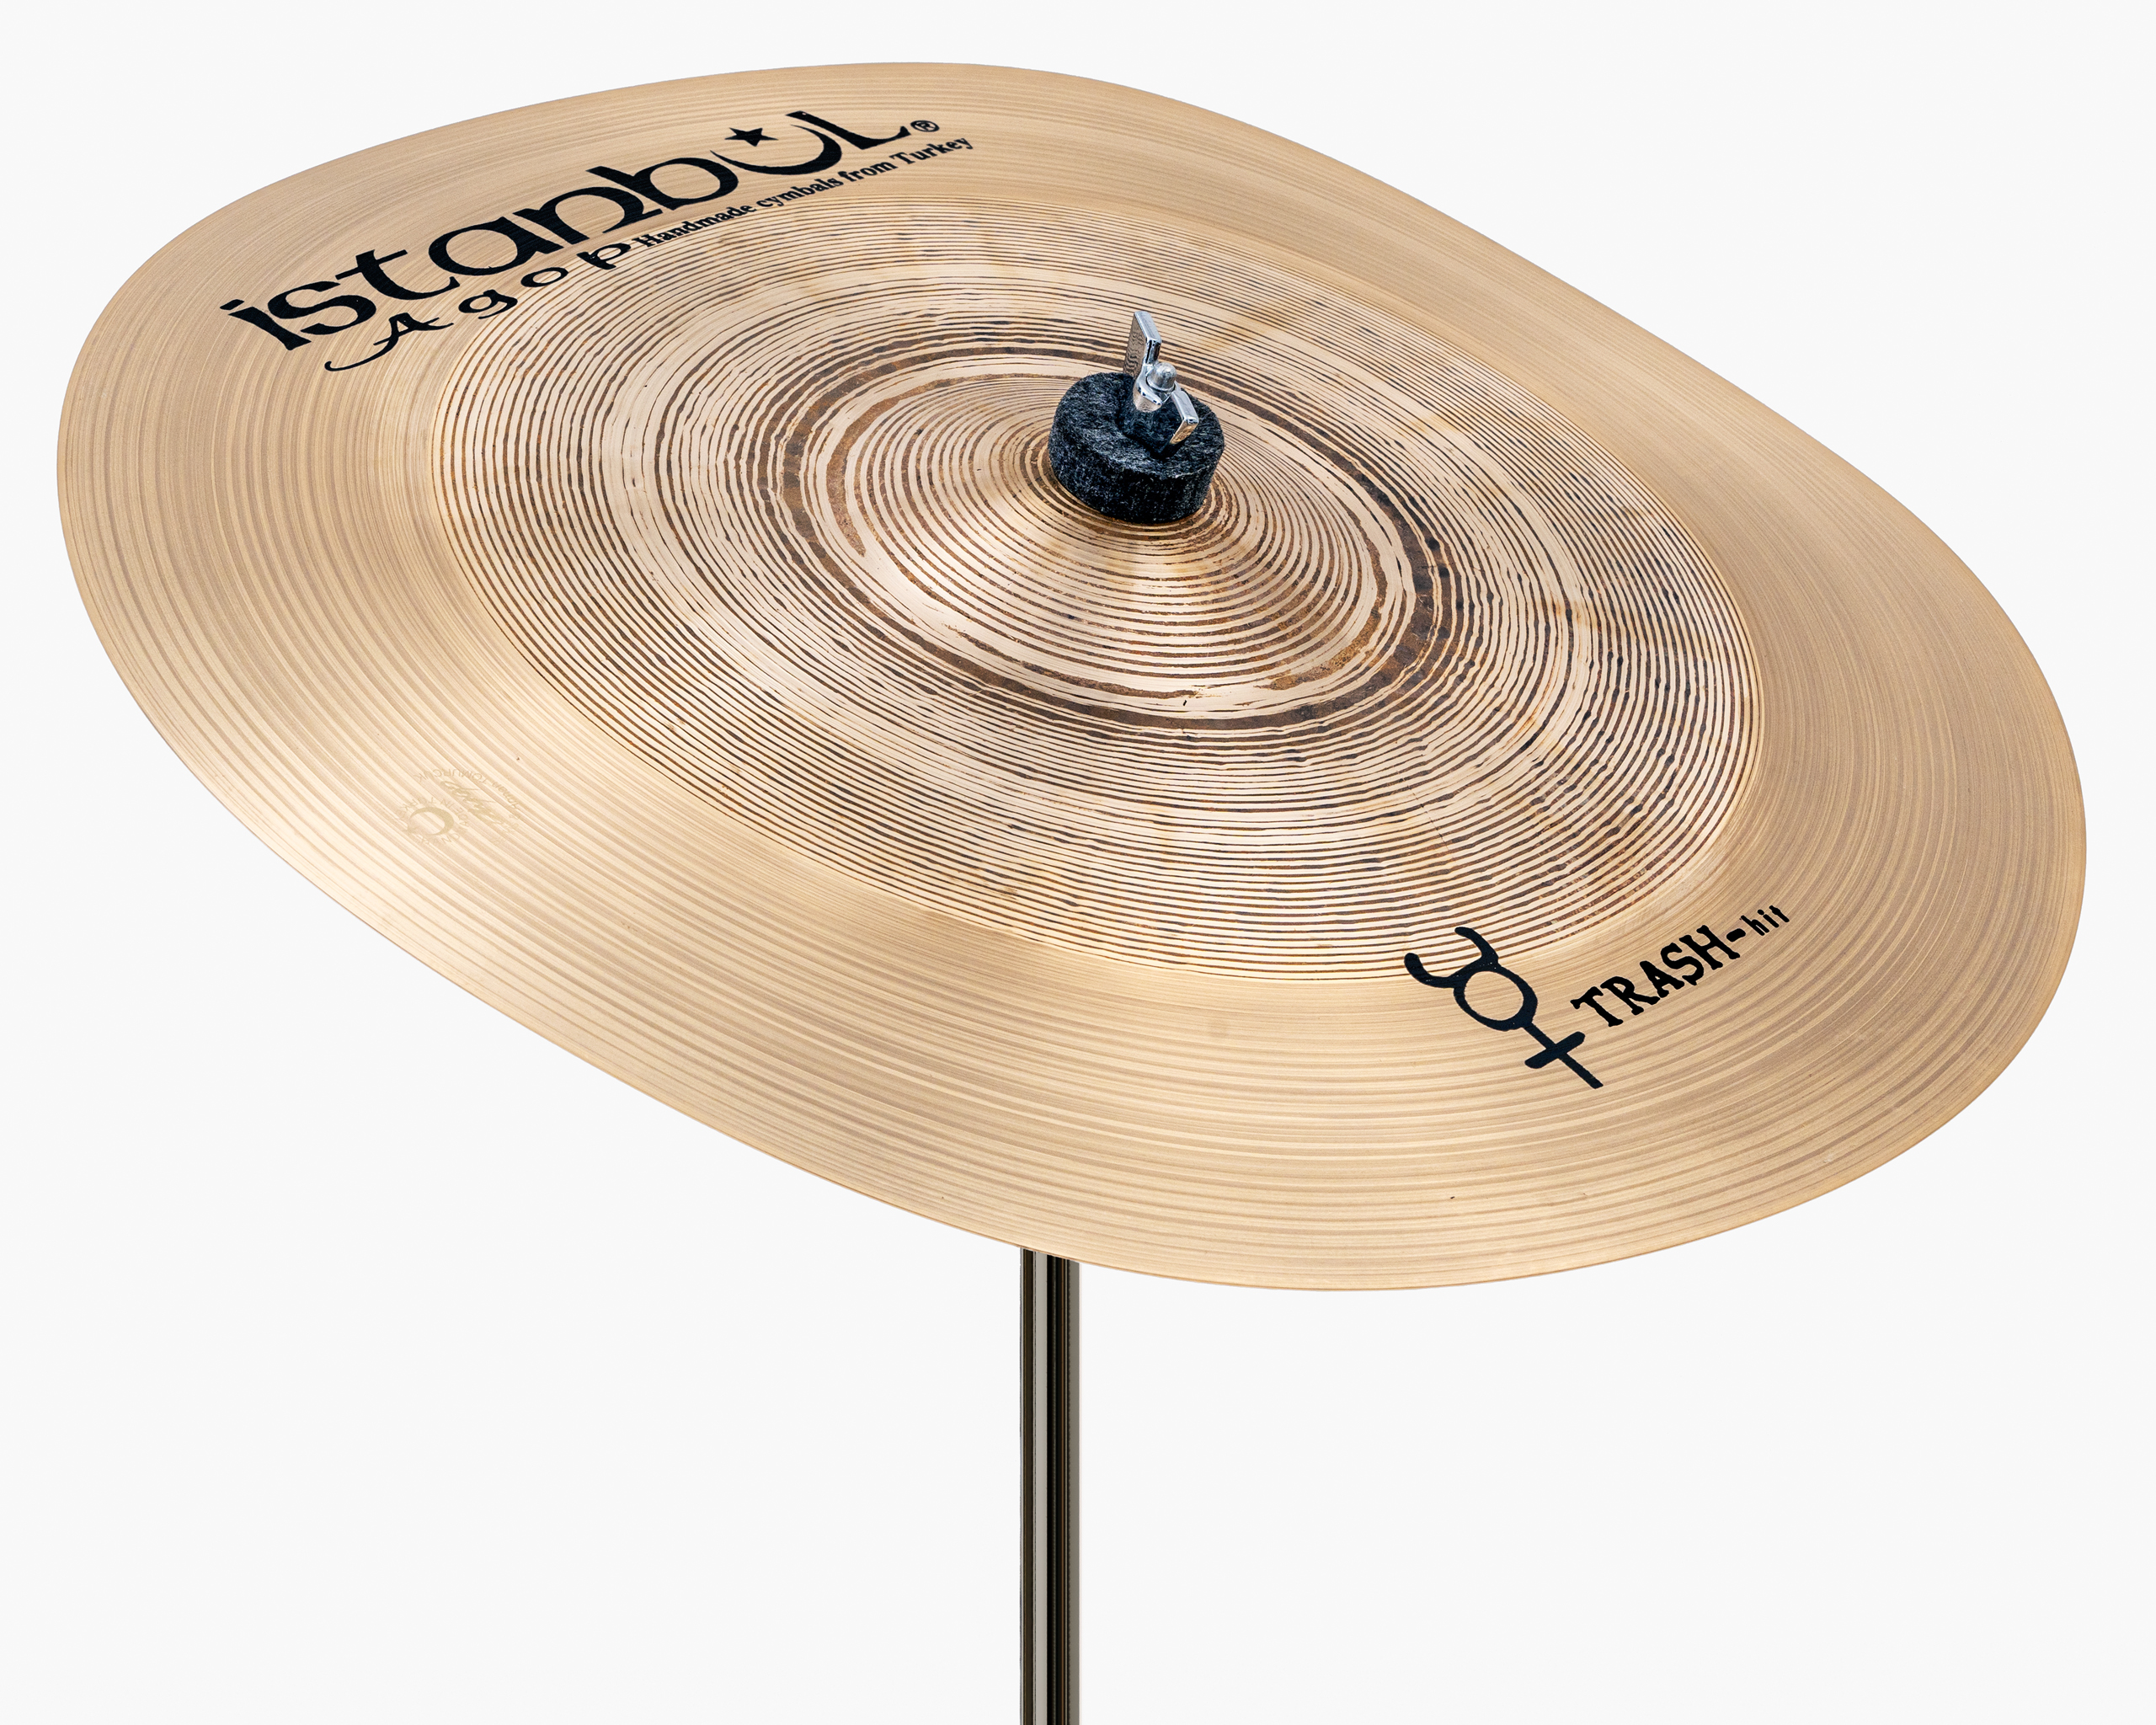 22″ Traditional Trash Hit – Istanbul Cymbals